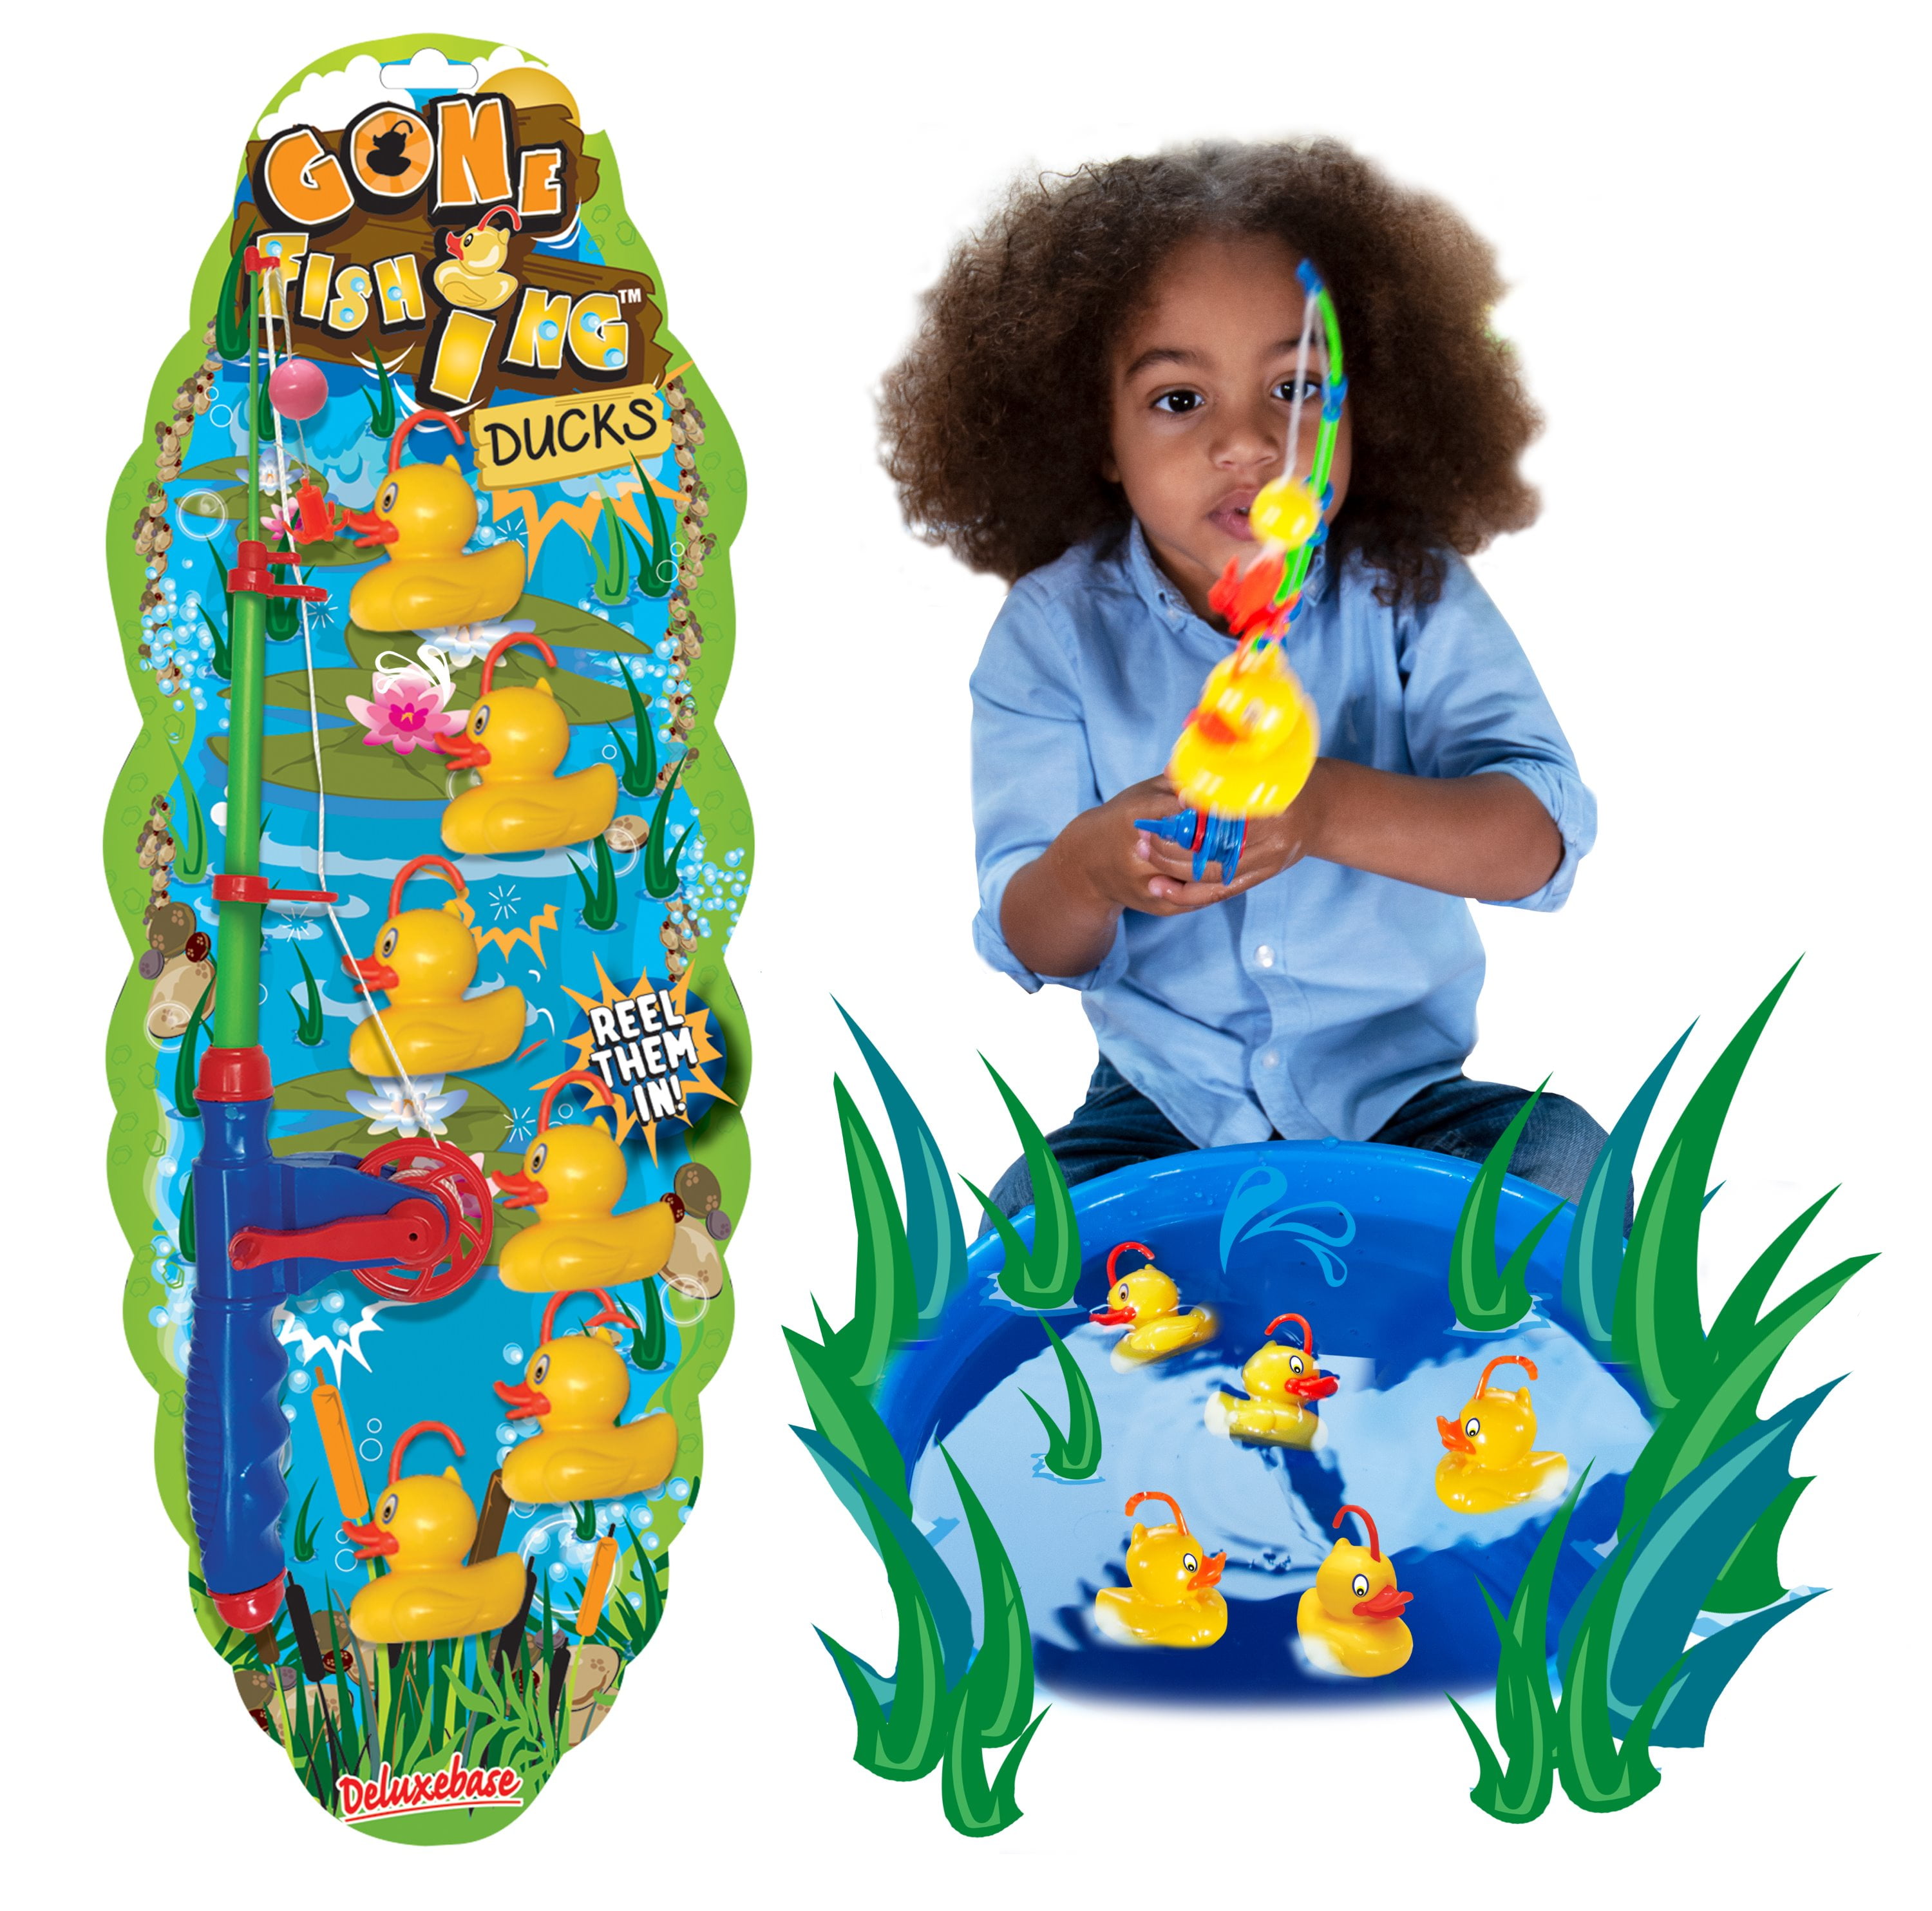 Gone Fishing - Safari Ducks from Deluxebase. Novelty Fishing Game Bath  Toys. Safari-Themed Traditional Hook-a-Duck Style Carnival Games for Kids.